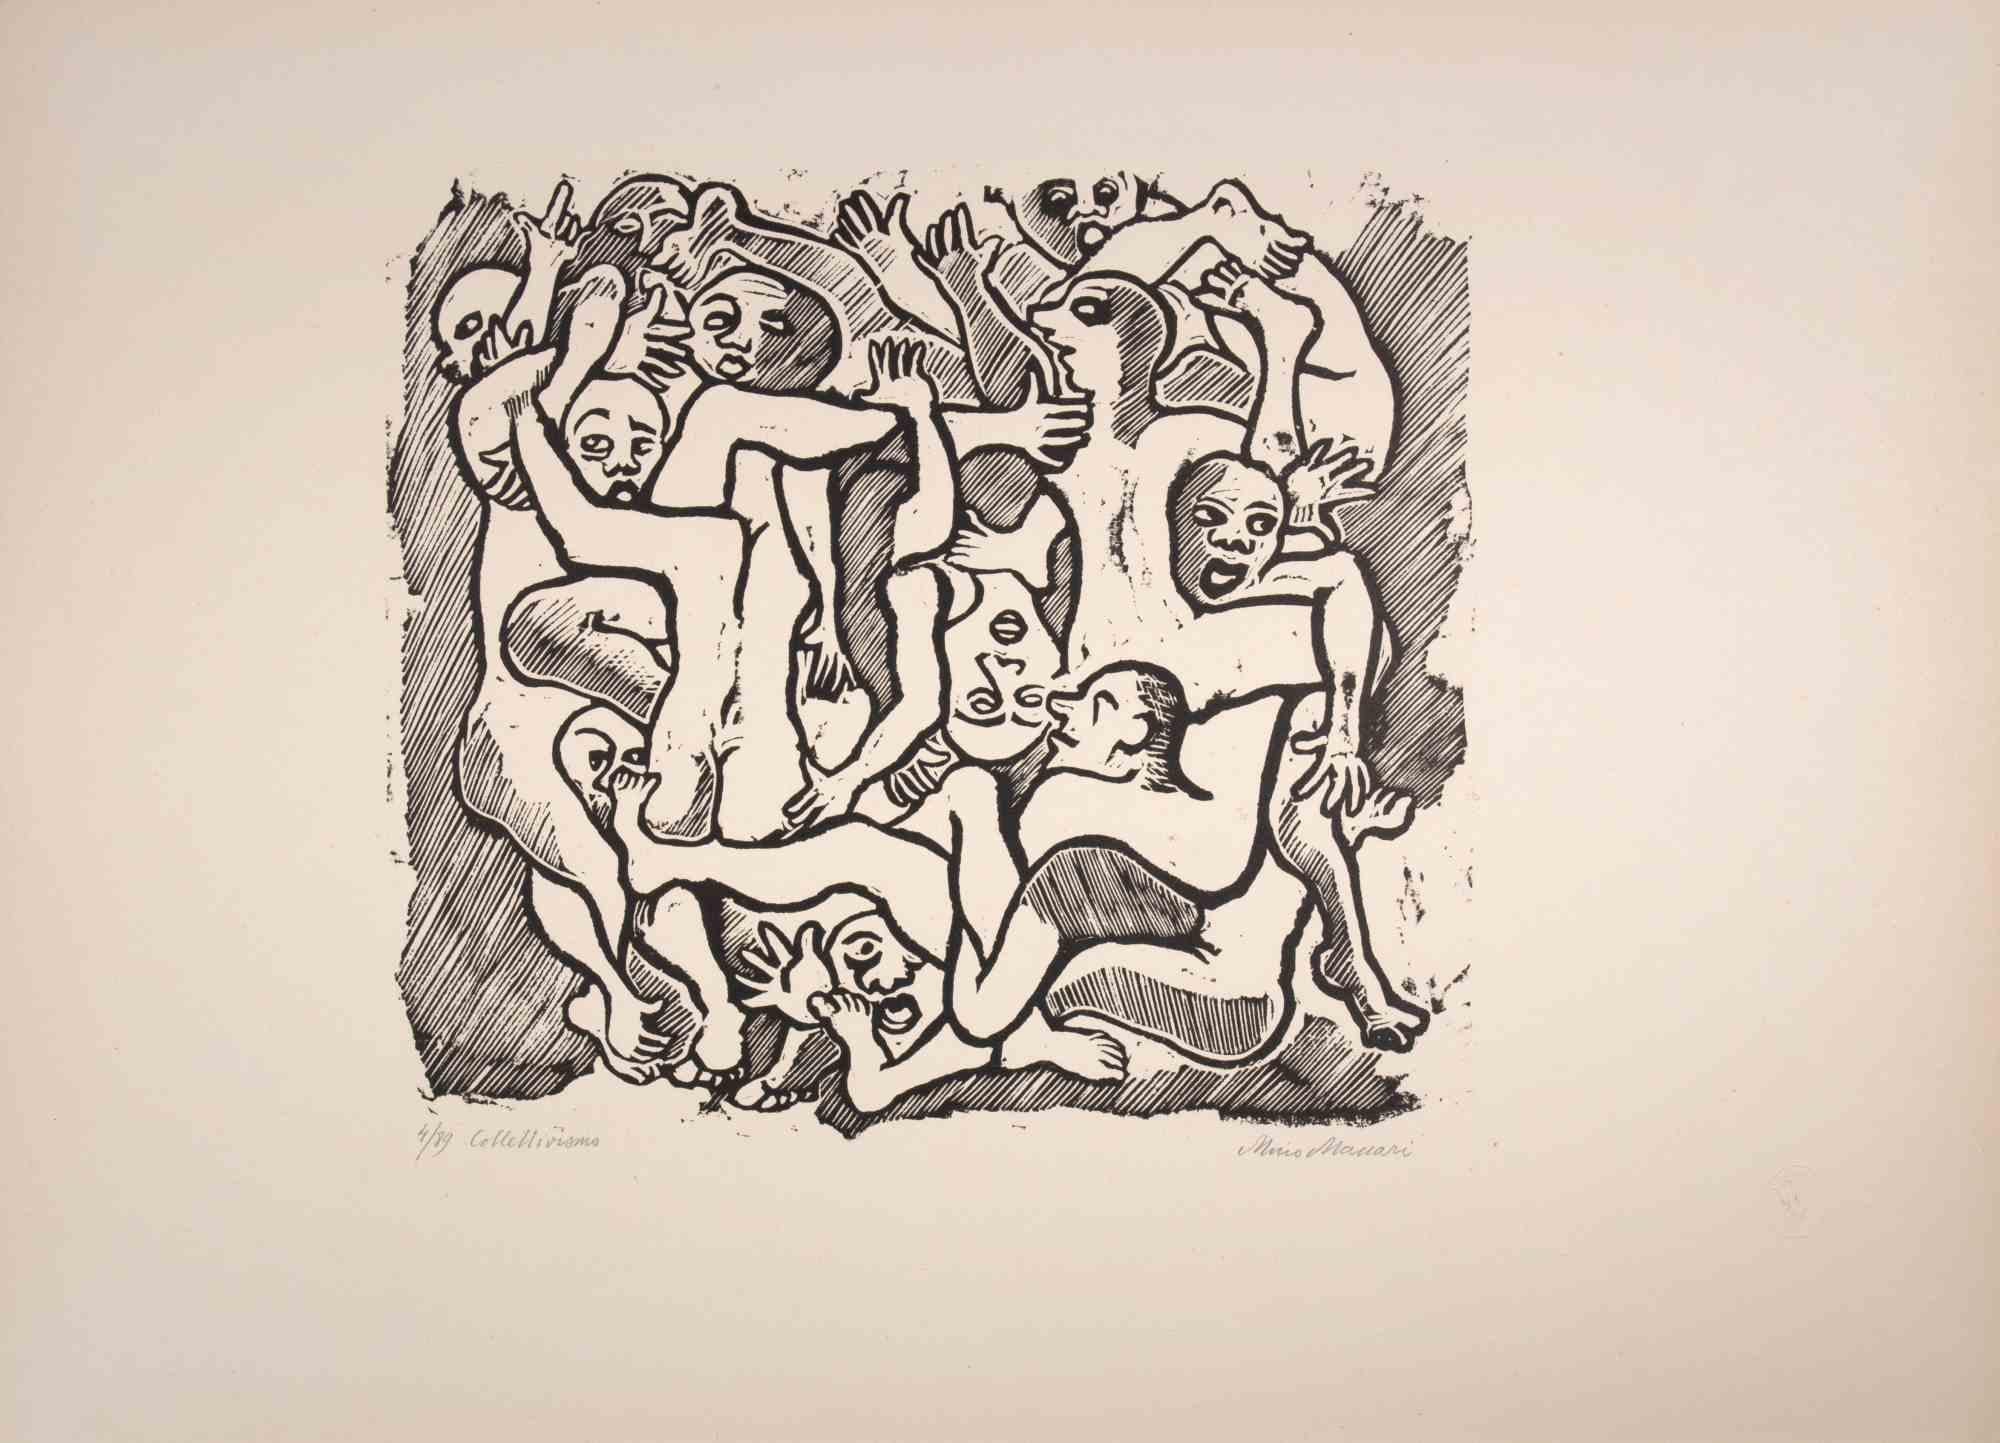 Collectivism is an Artwork realized by Mino Maccari  (1924-1989) in the Mid-20th Century.

B./W.  woodcut on paper. Hand-signed on the lower, numbered 4/89 specimens and titled on the left margin.

Good conditions.

Mino Maccari (Siena, 1924-Rome,